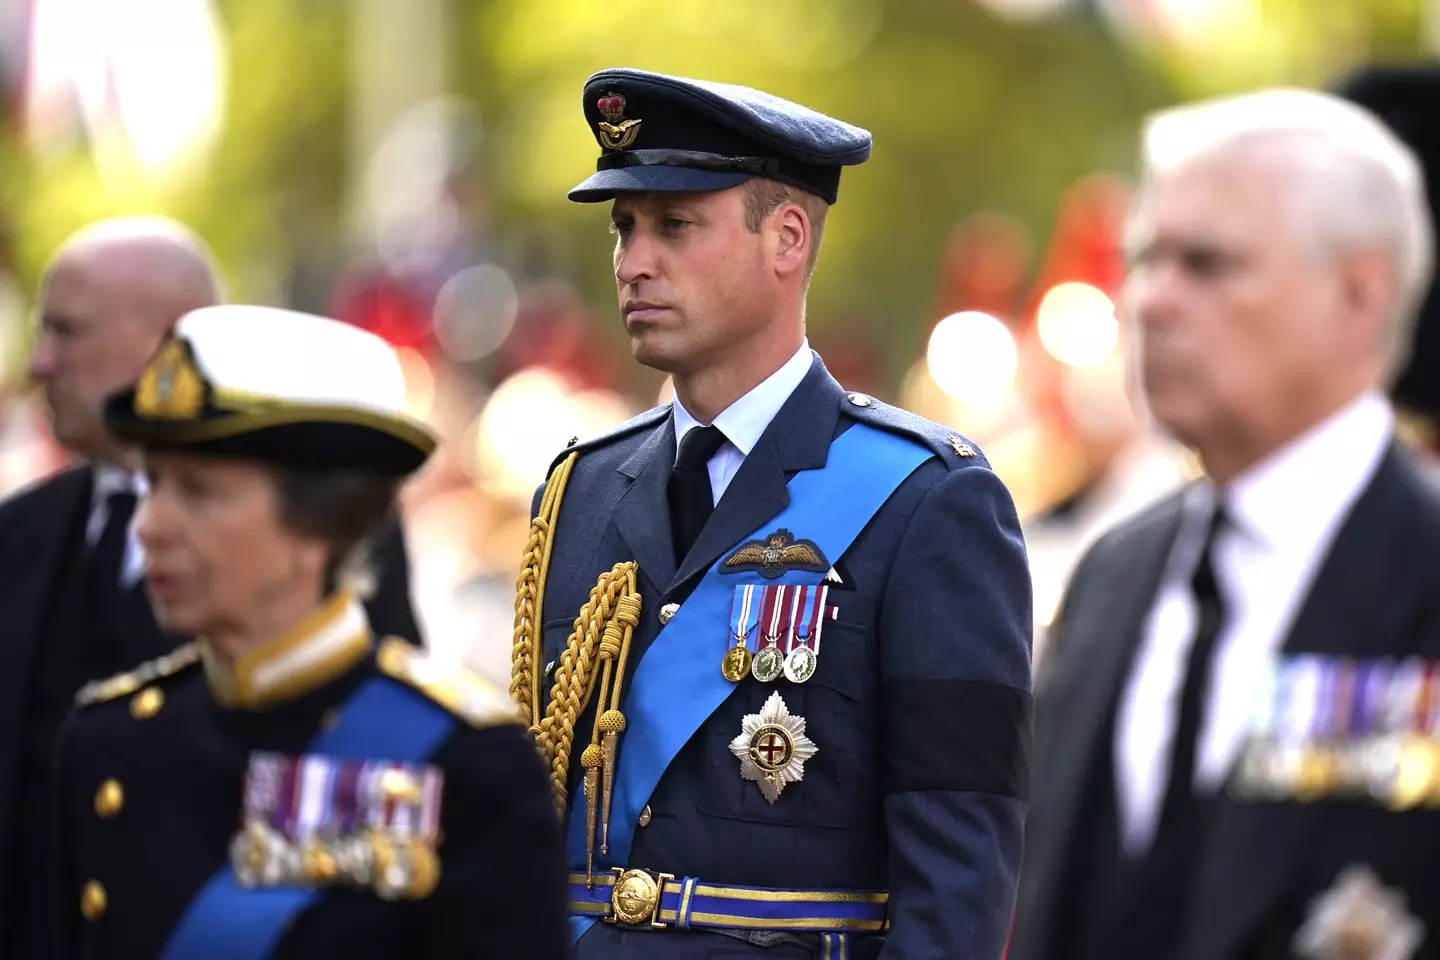 Prince William became Prince of Wales following the Queen's death.